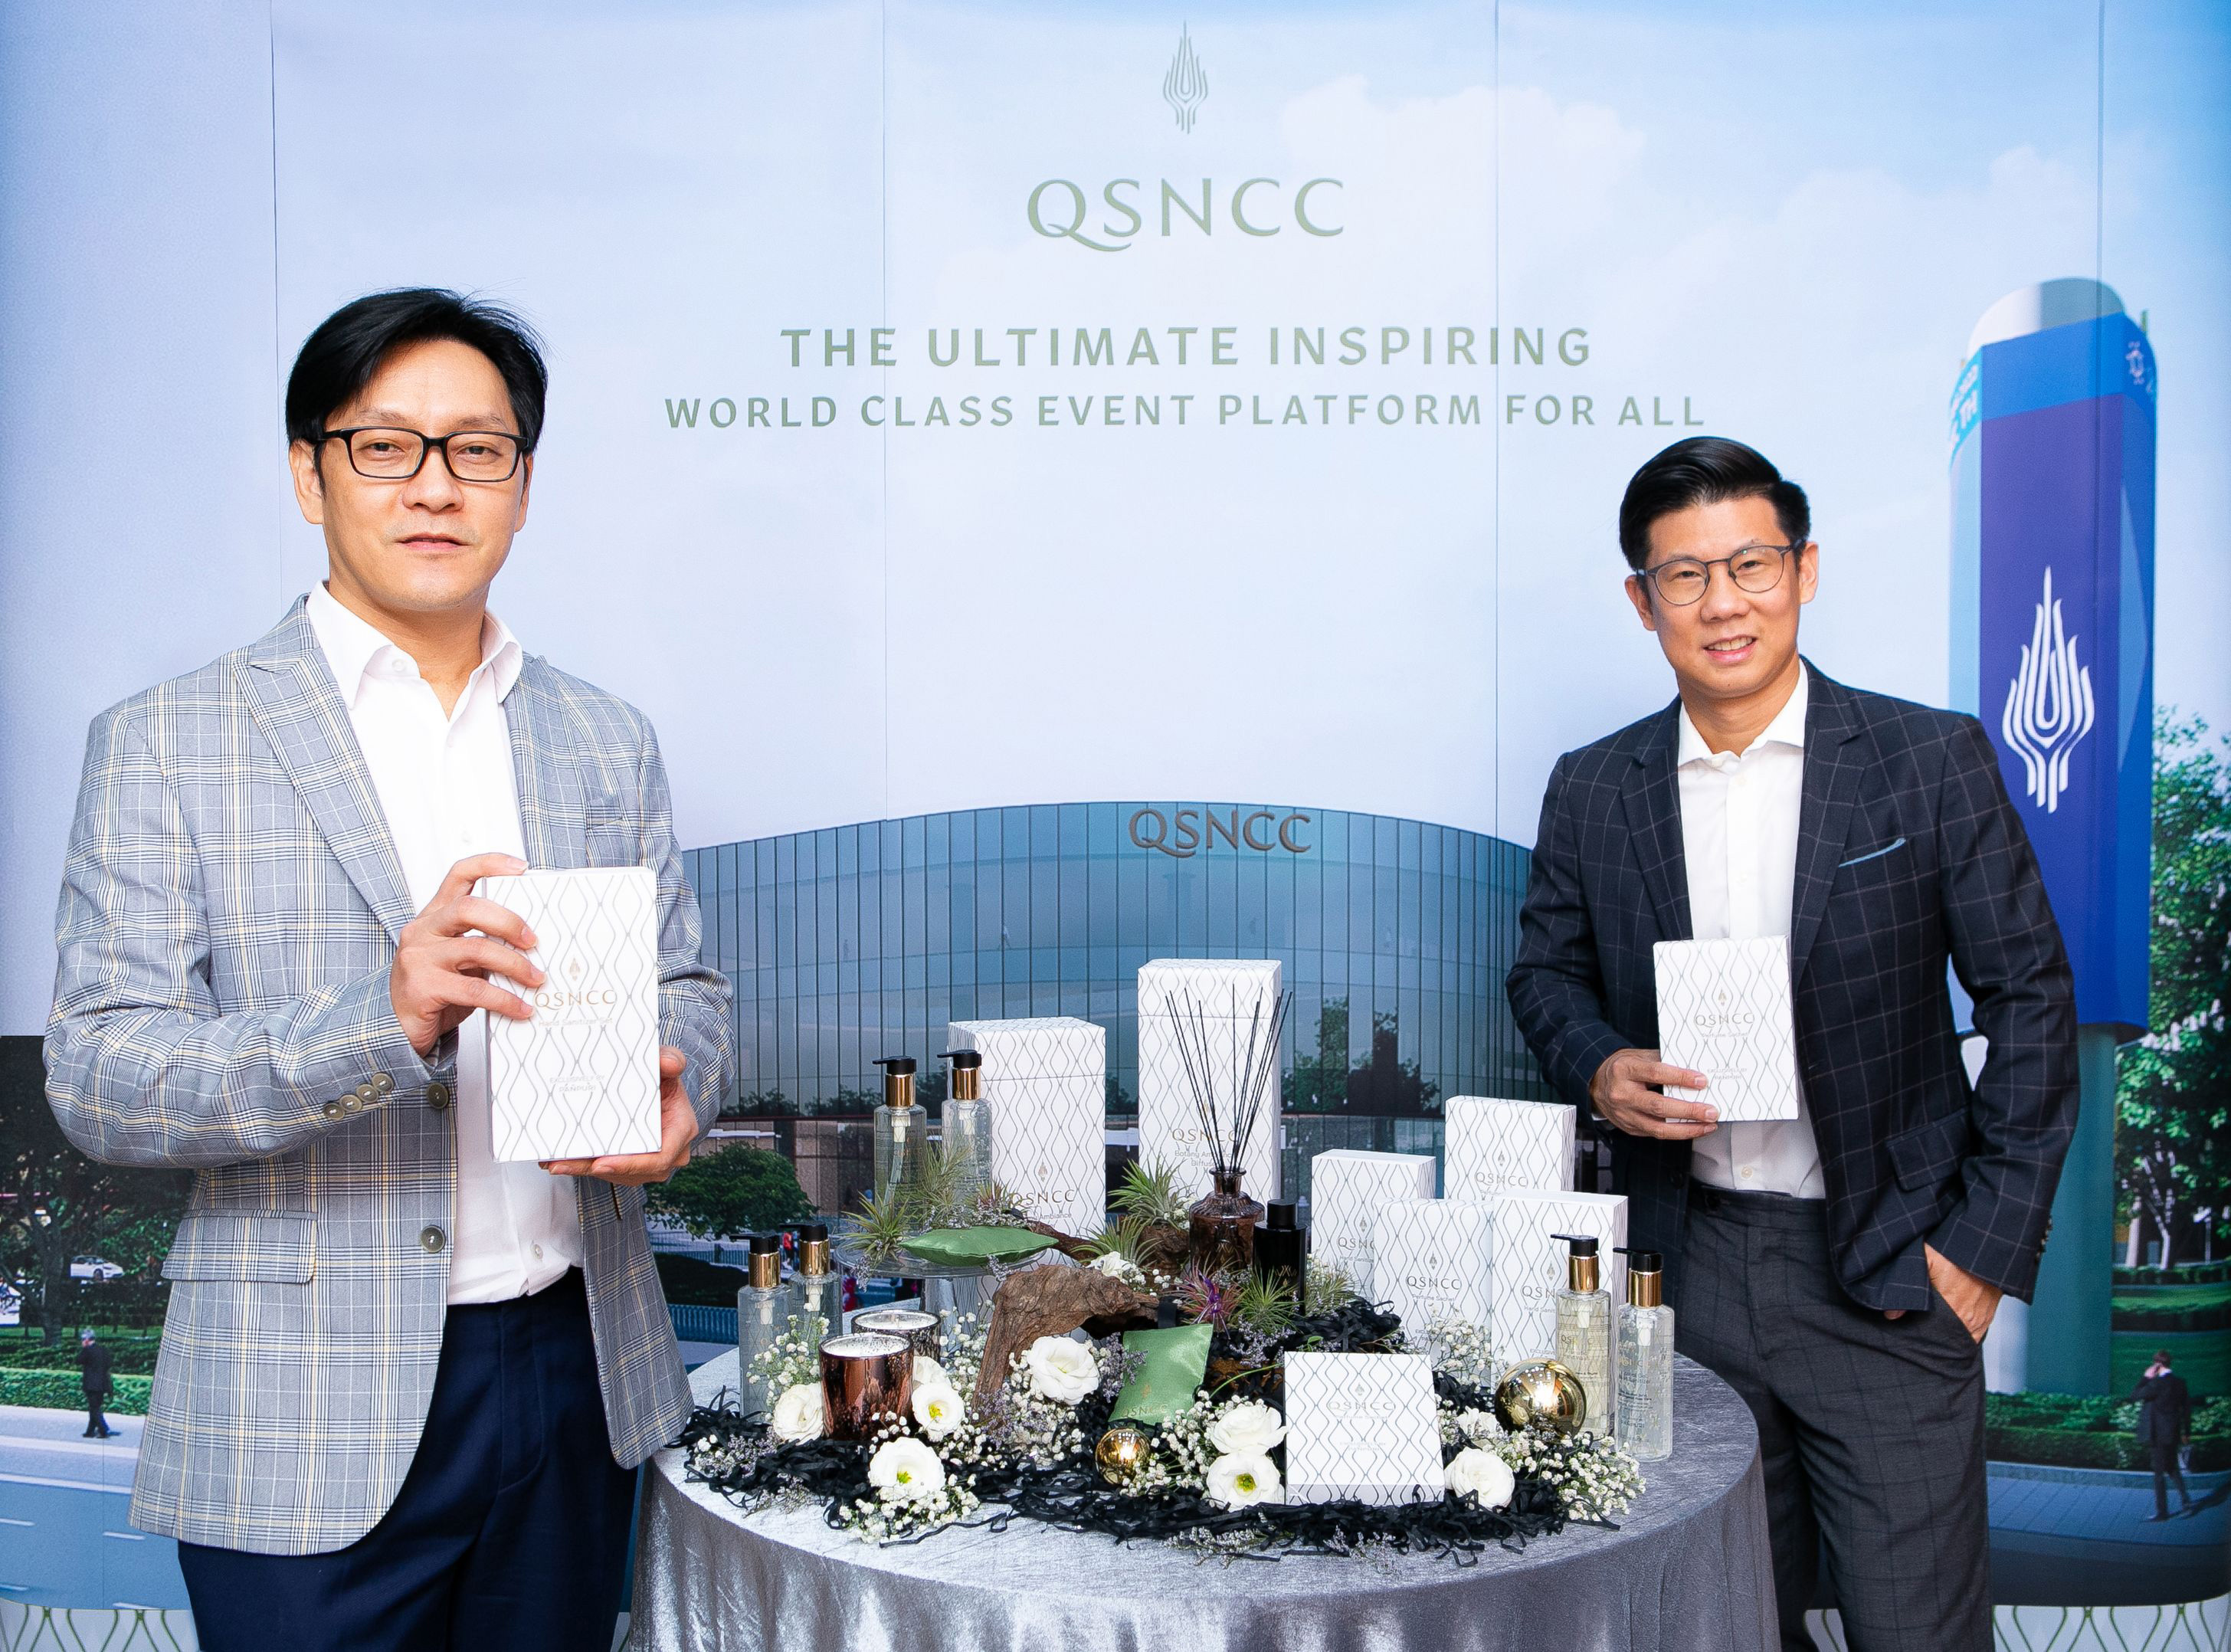 QSNCC and PA\xd1PURI create a new experience with a unique signature scent to welcome visitors this September